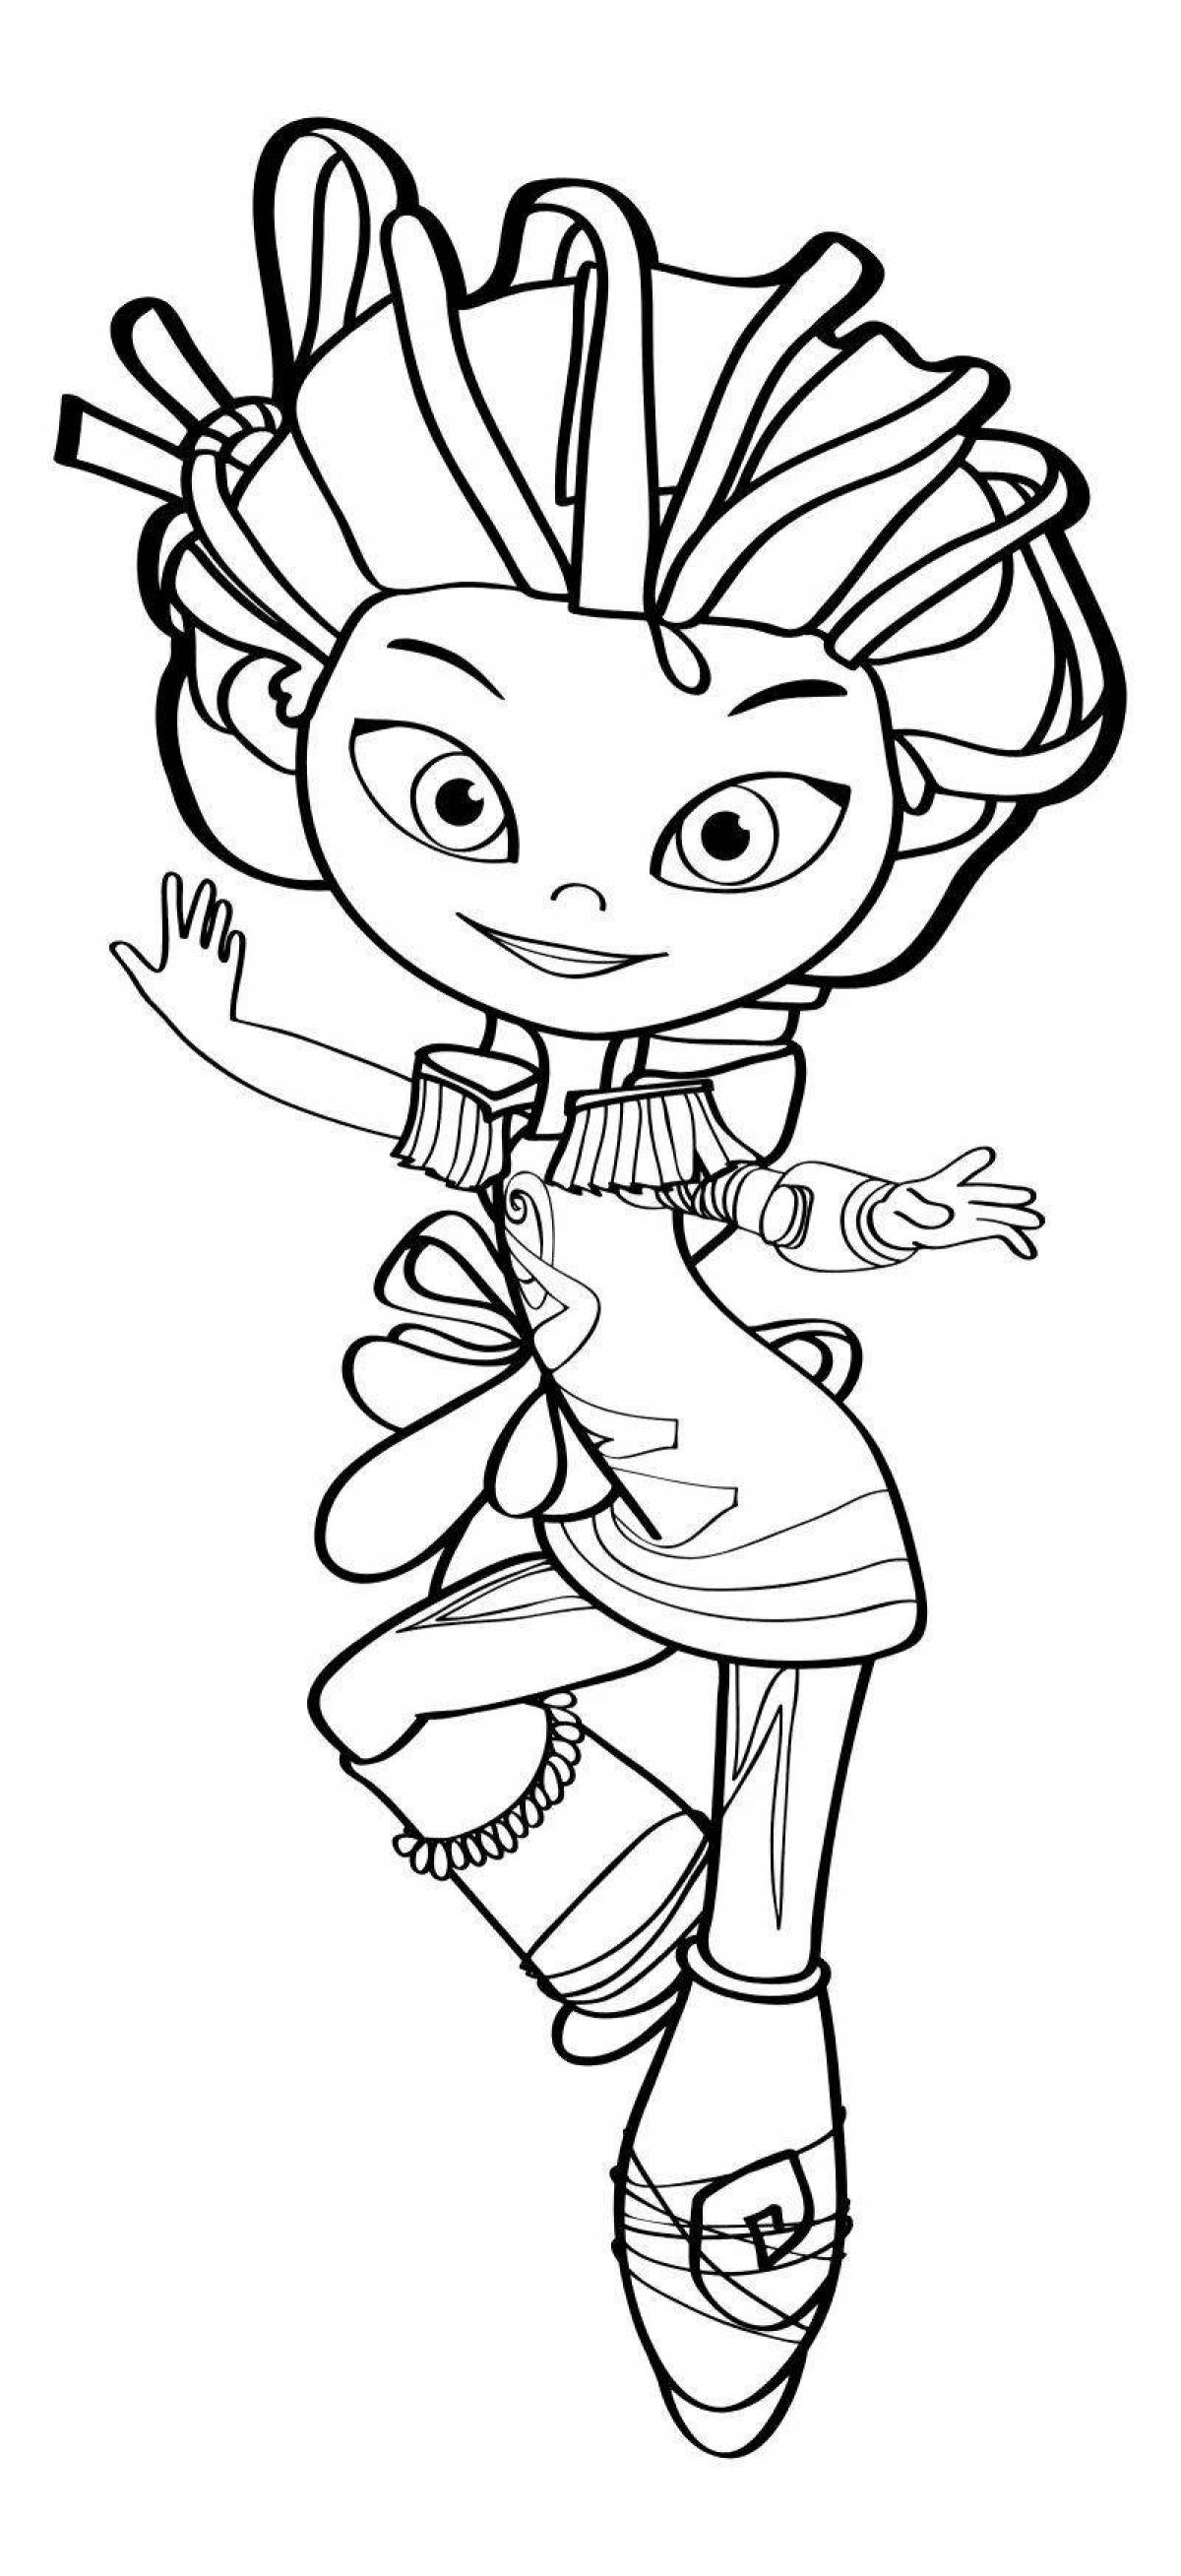 Dazzling coloring page patrol new